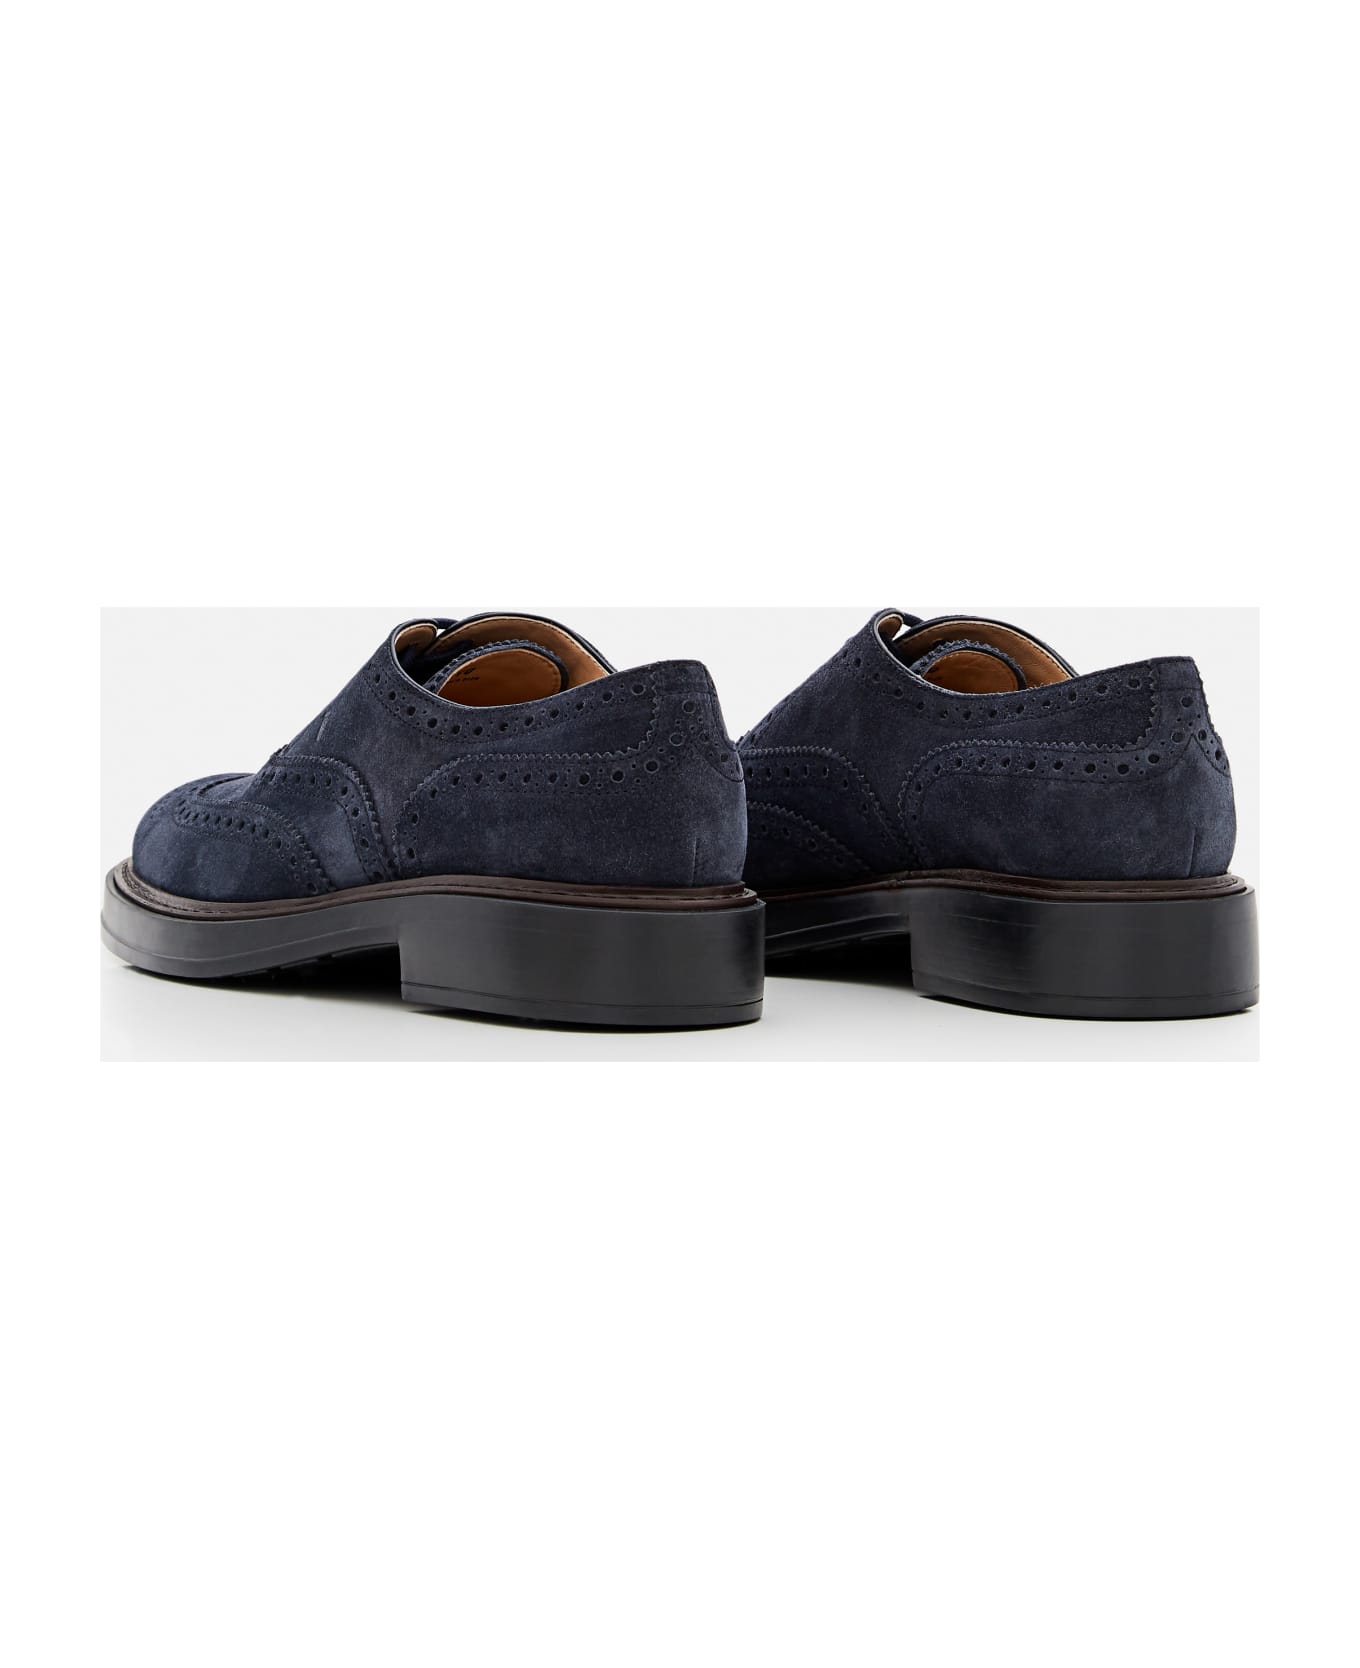 Tod's Francesina Bucature Extralight Derby Shoes - Blue